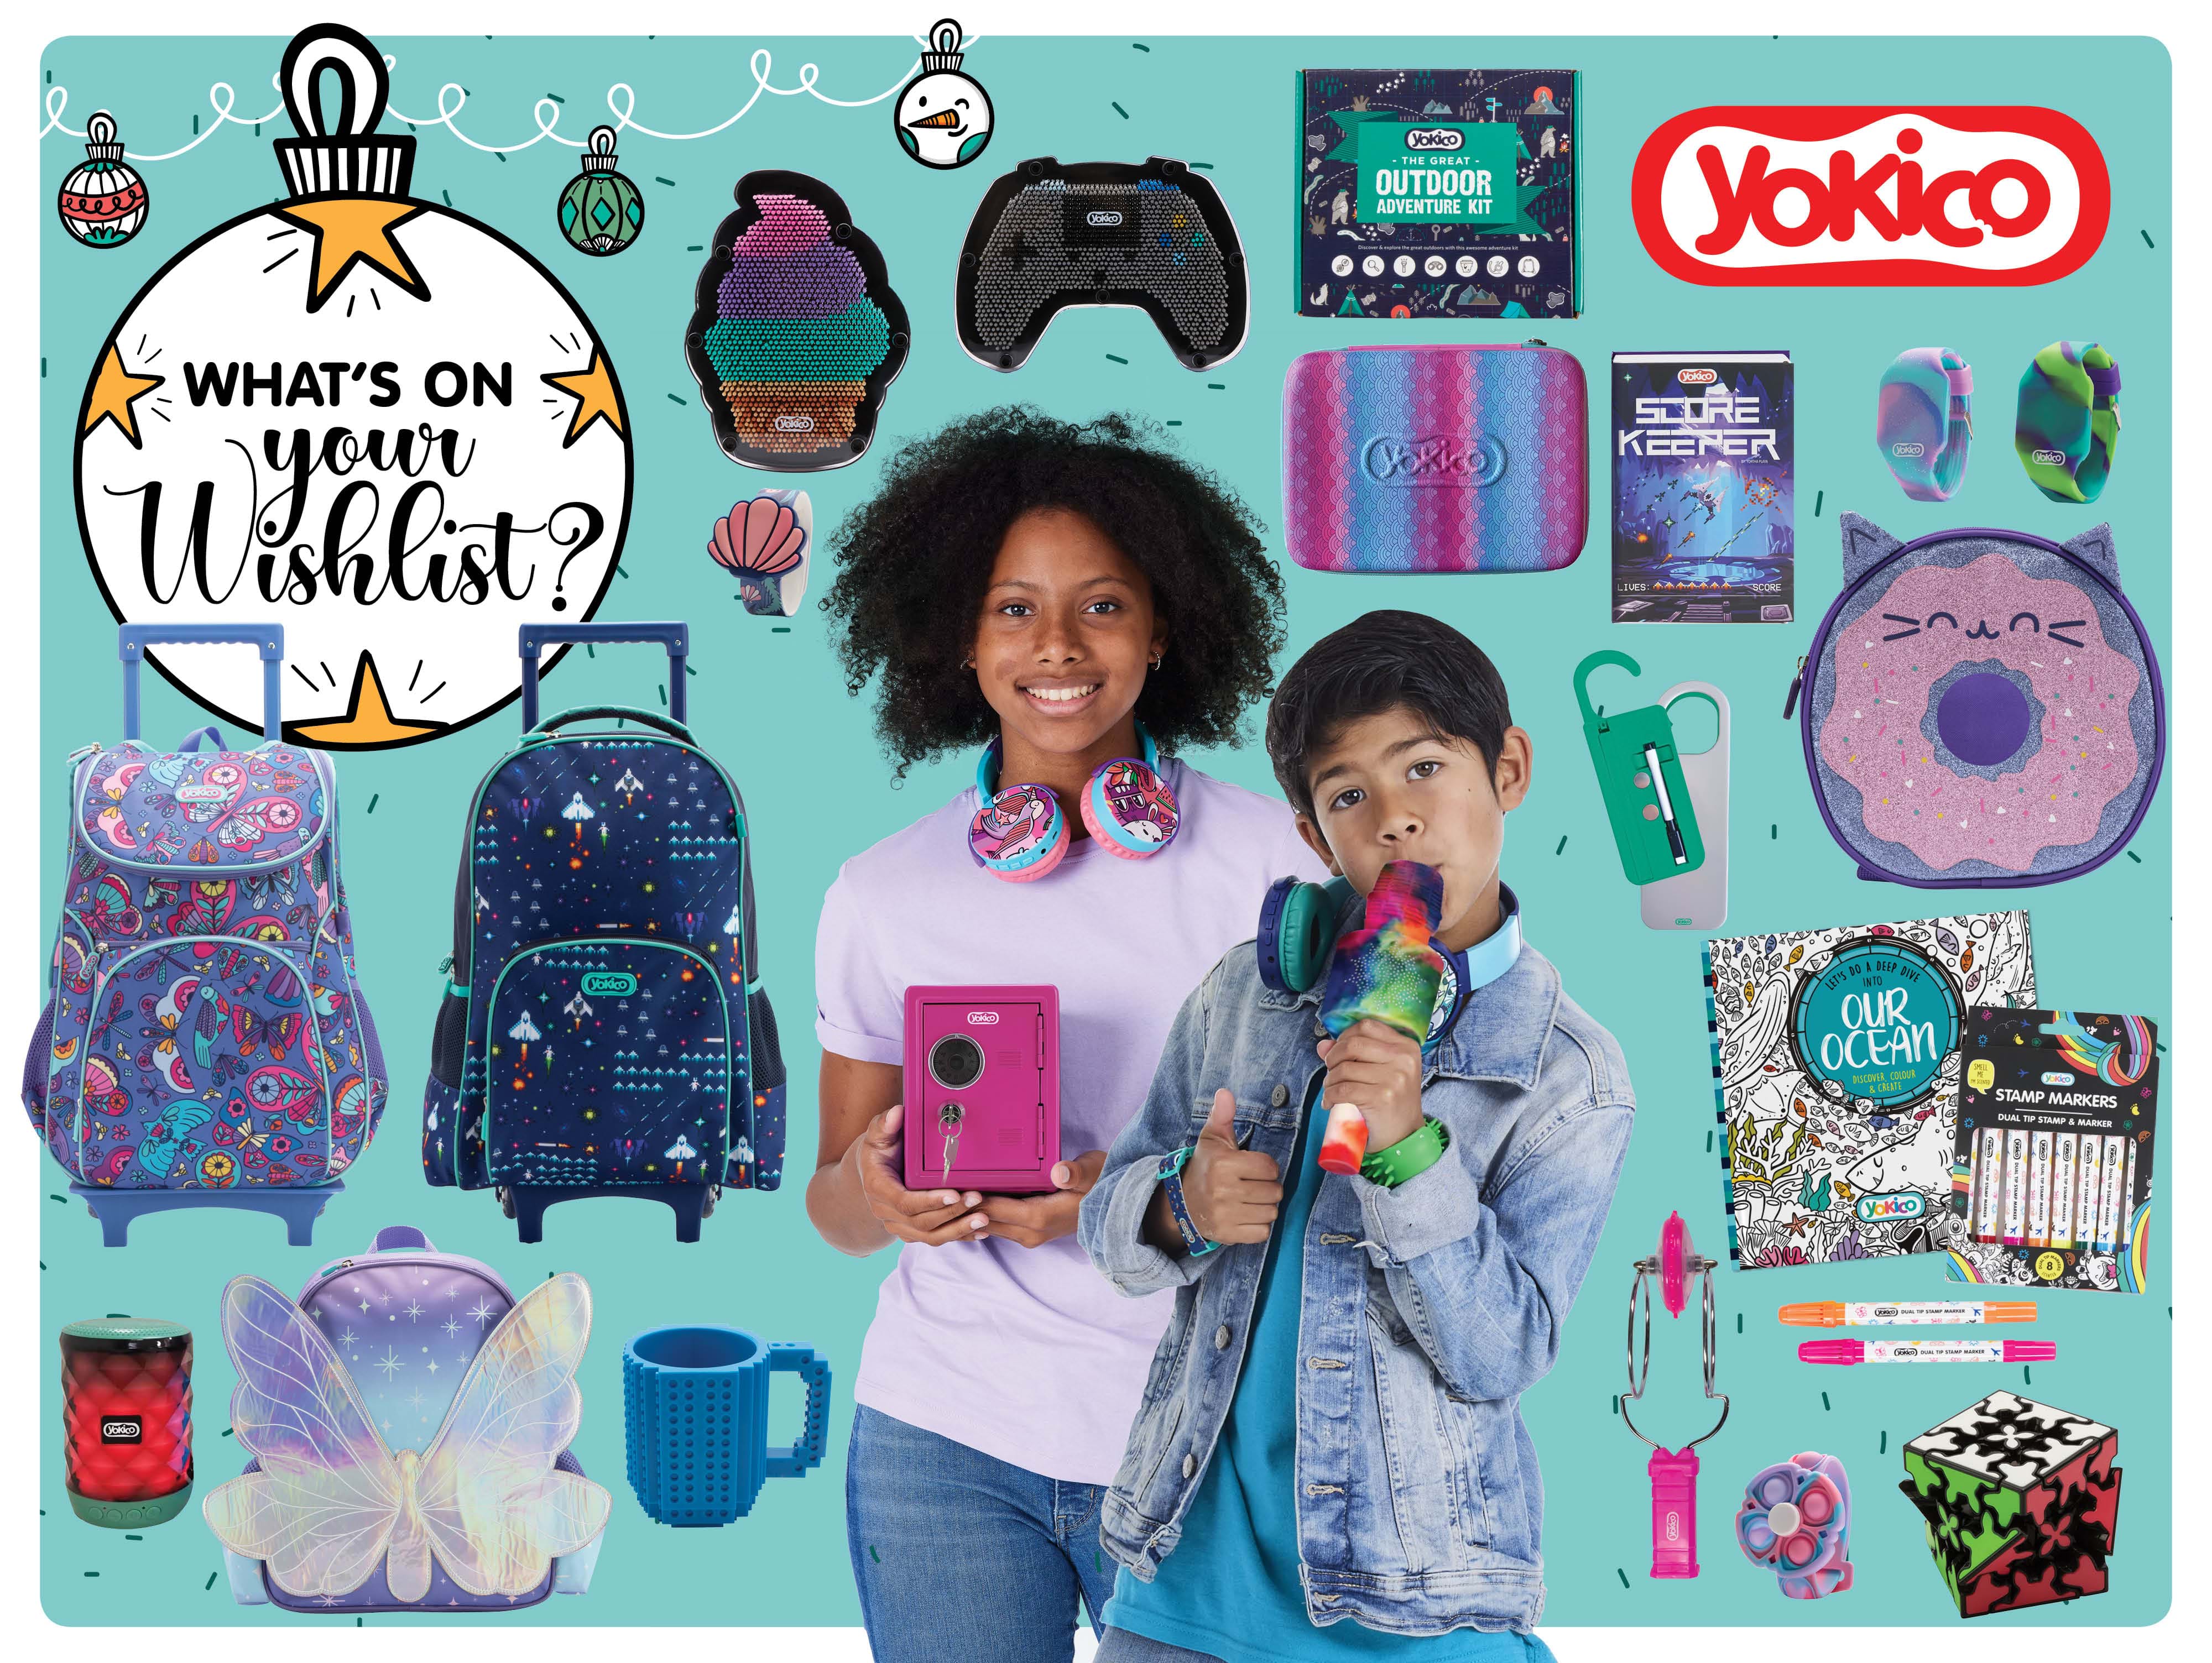 Win 1 of 3 Yokico hampers valued at R1 000 each